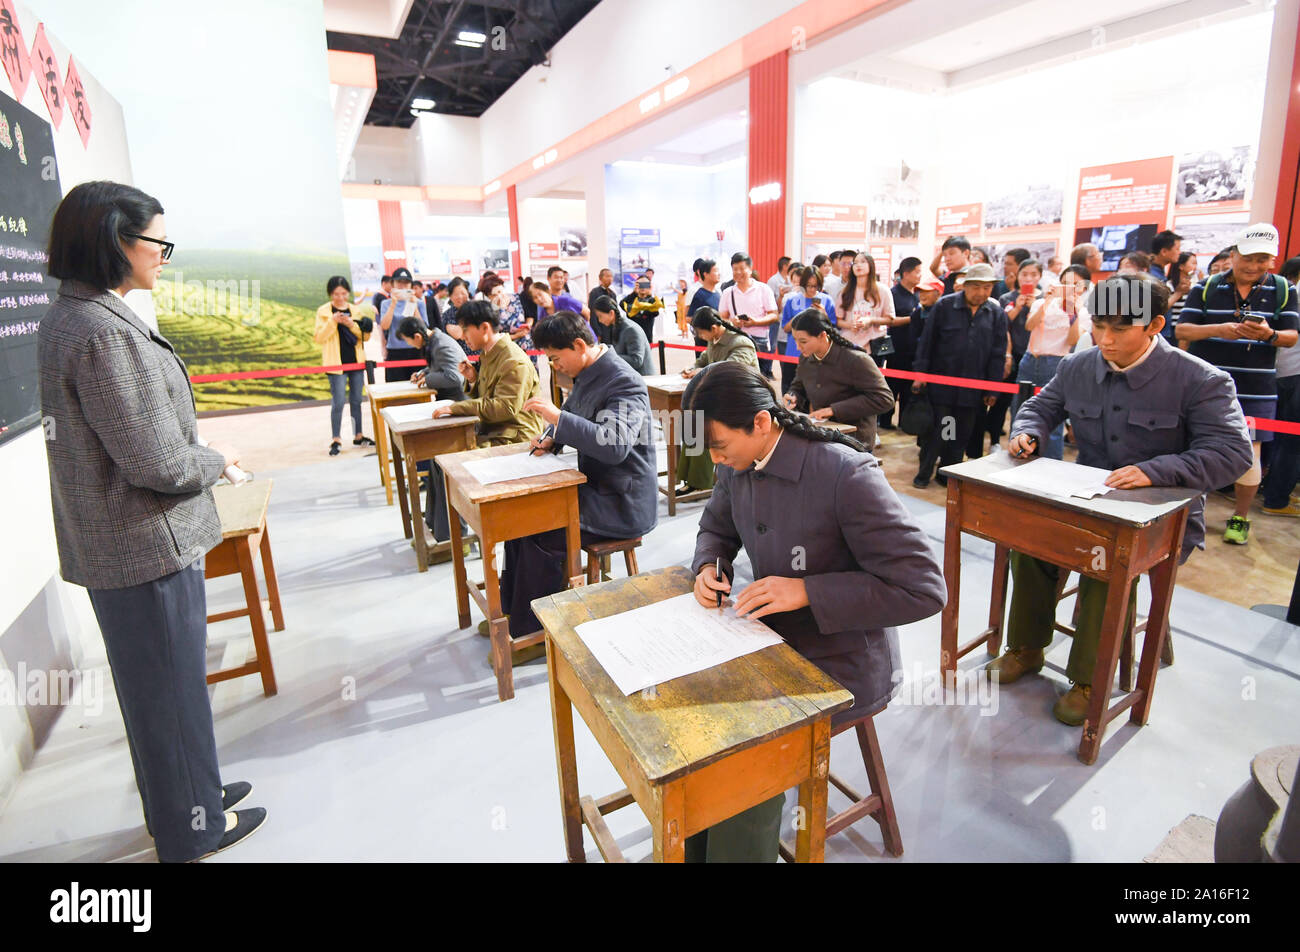 Beijing, China. 24th Sep, 2019. Visitors view a scene of China's national college entrance examination in 1977 at a grand exhibition of achievements in commemoration of the 70th anniversary of the founding of the People's Republic of China (PRC) at the Beijing Exhibition Center in Beijing, capital of China, Sept. 24, 2019. The exhibition opened to the public on Tuesday. Credit: Chen Yehua/Xinhua/Alamy Live News Stock Photo